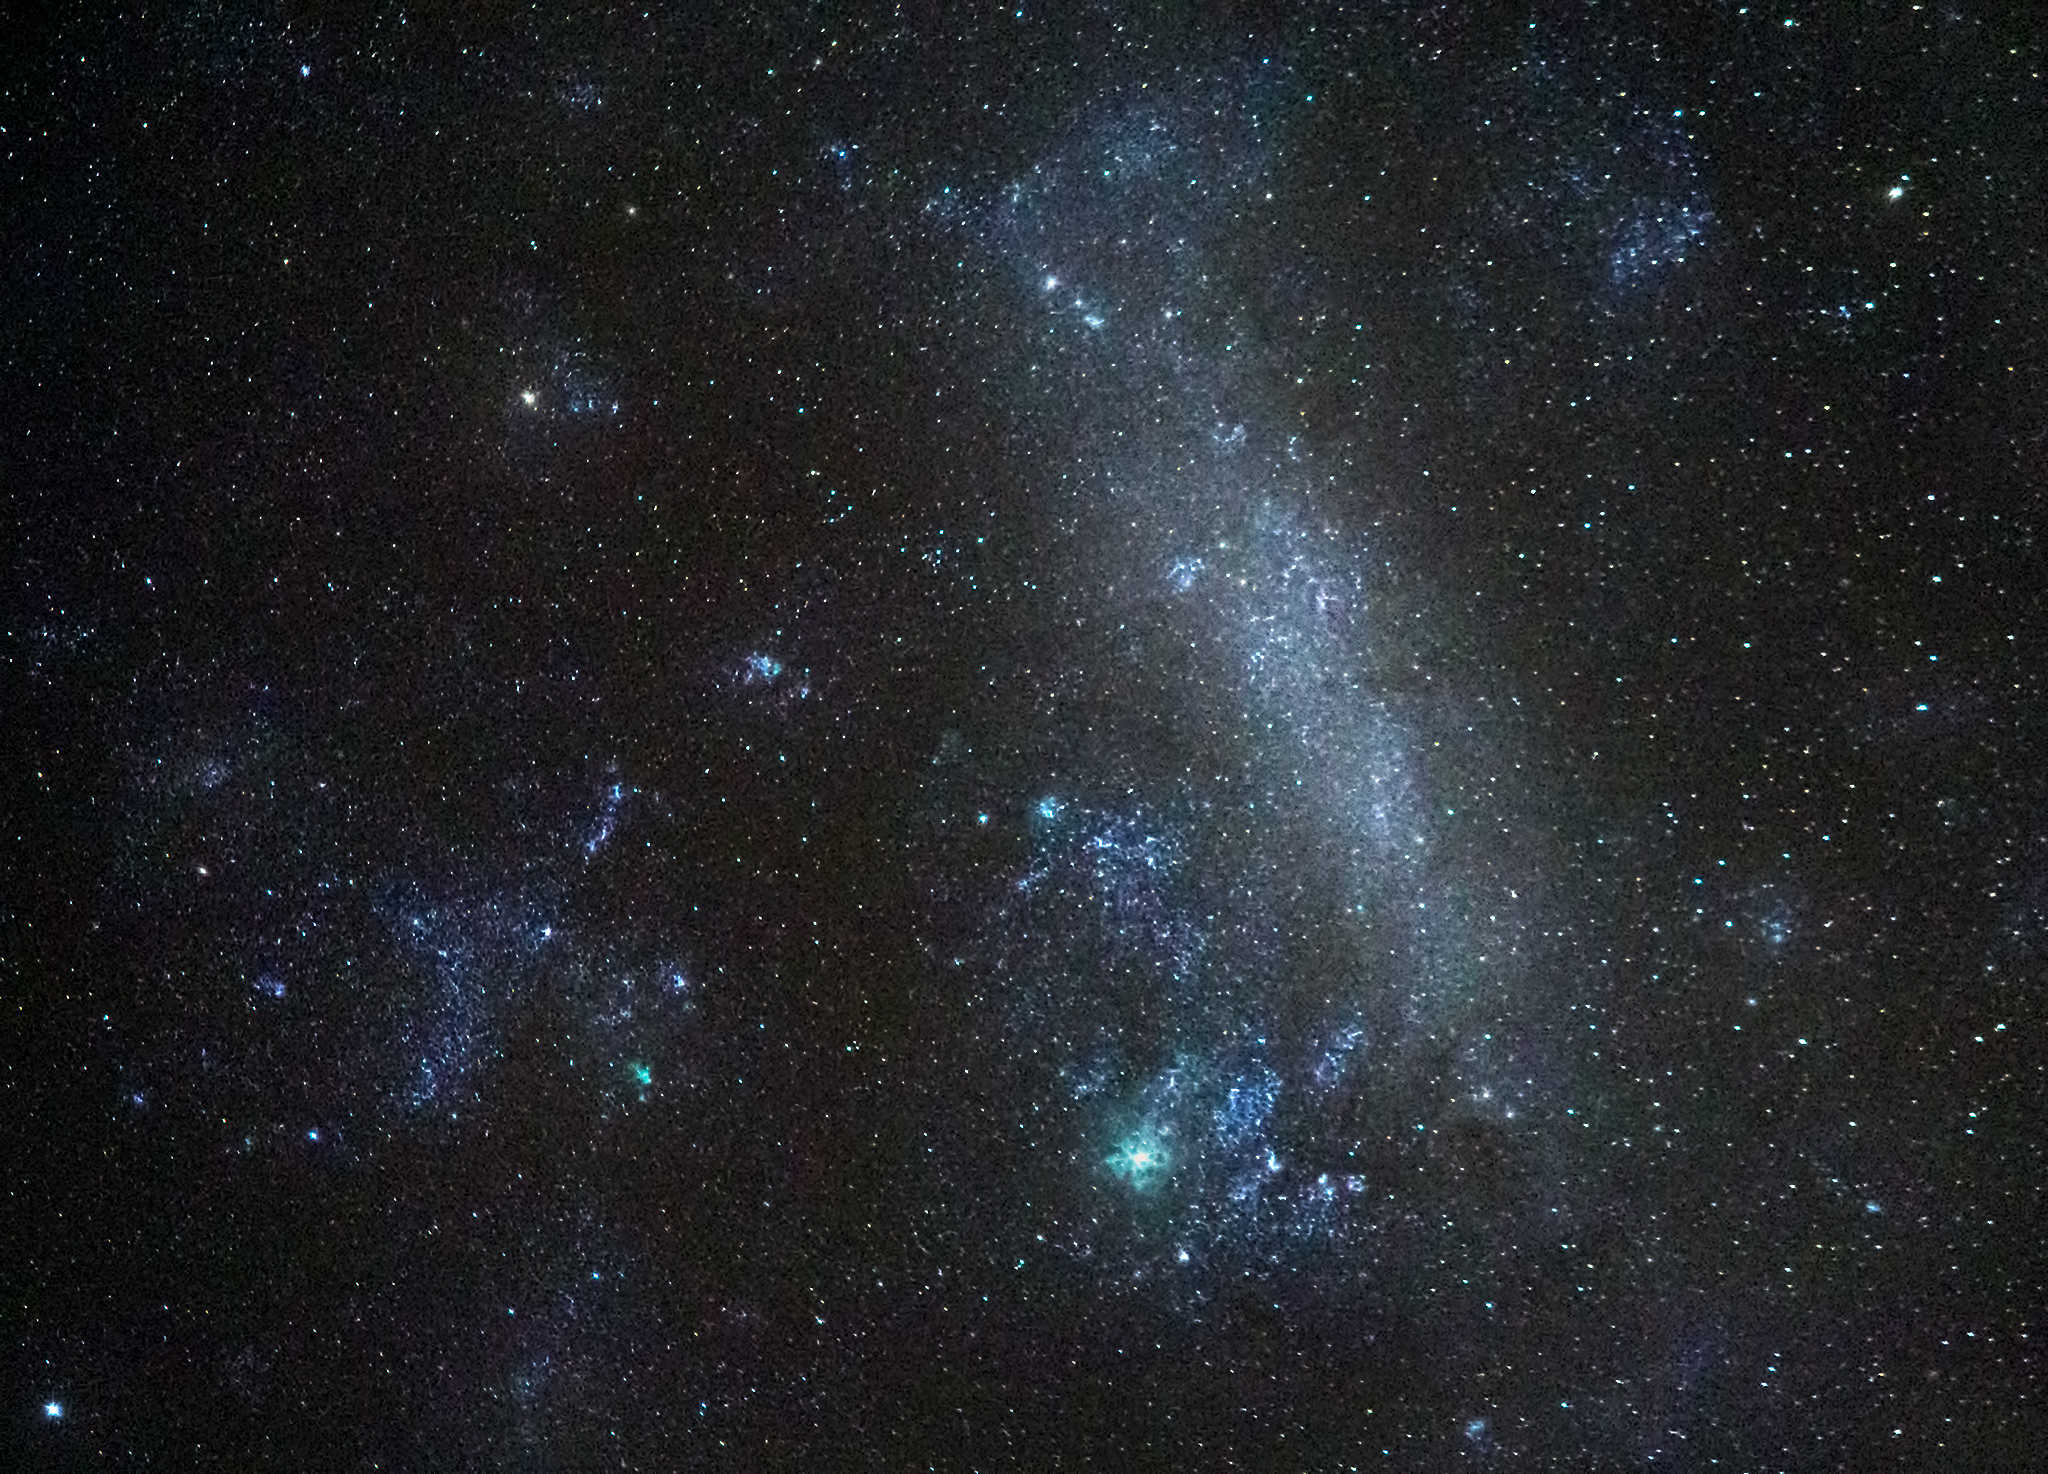 Image of the Large Magellanic Cloud